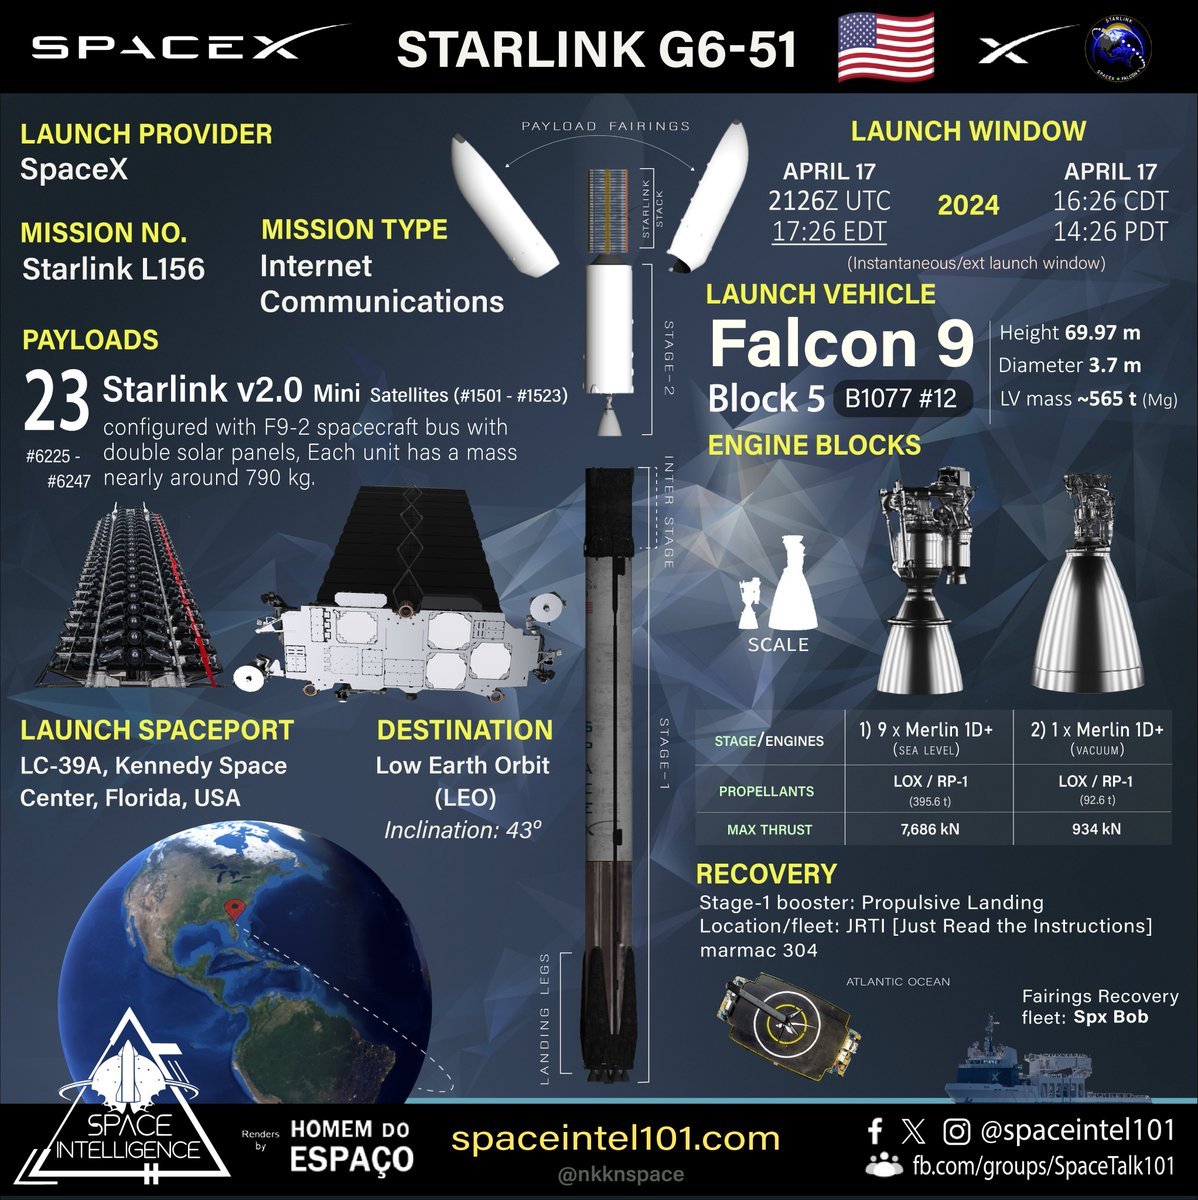 Orbital launch no. 74 of 2024 🇺🇲🚀⭐🔗🛰️➕

Starlink L156 | SpaceX | April 17 | 2126 UTC

@SpaceX's 26th #Starlink mission of 2024 to launch 23 v2.0 @Starlink Mini🛰️ on its #Falcon9 #B1077.12🚀 to 43° Low Earth Orbit from @NASAKennedy LC-39A, Cape Canaveral.
The booster flies for…